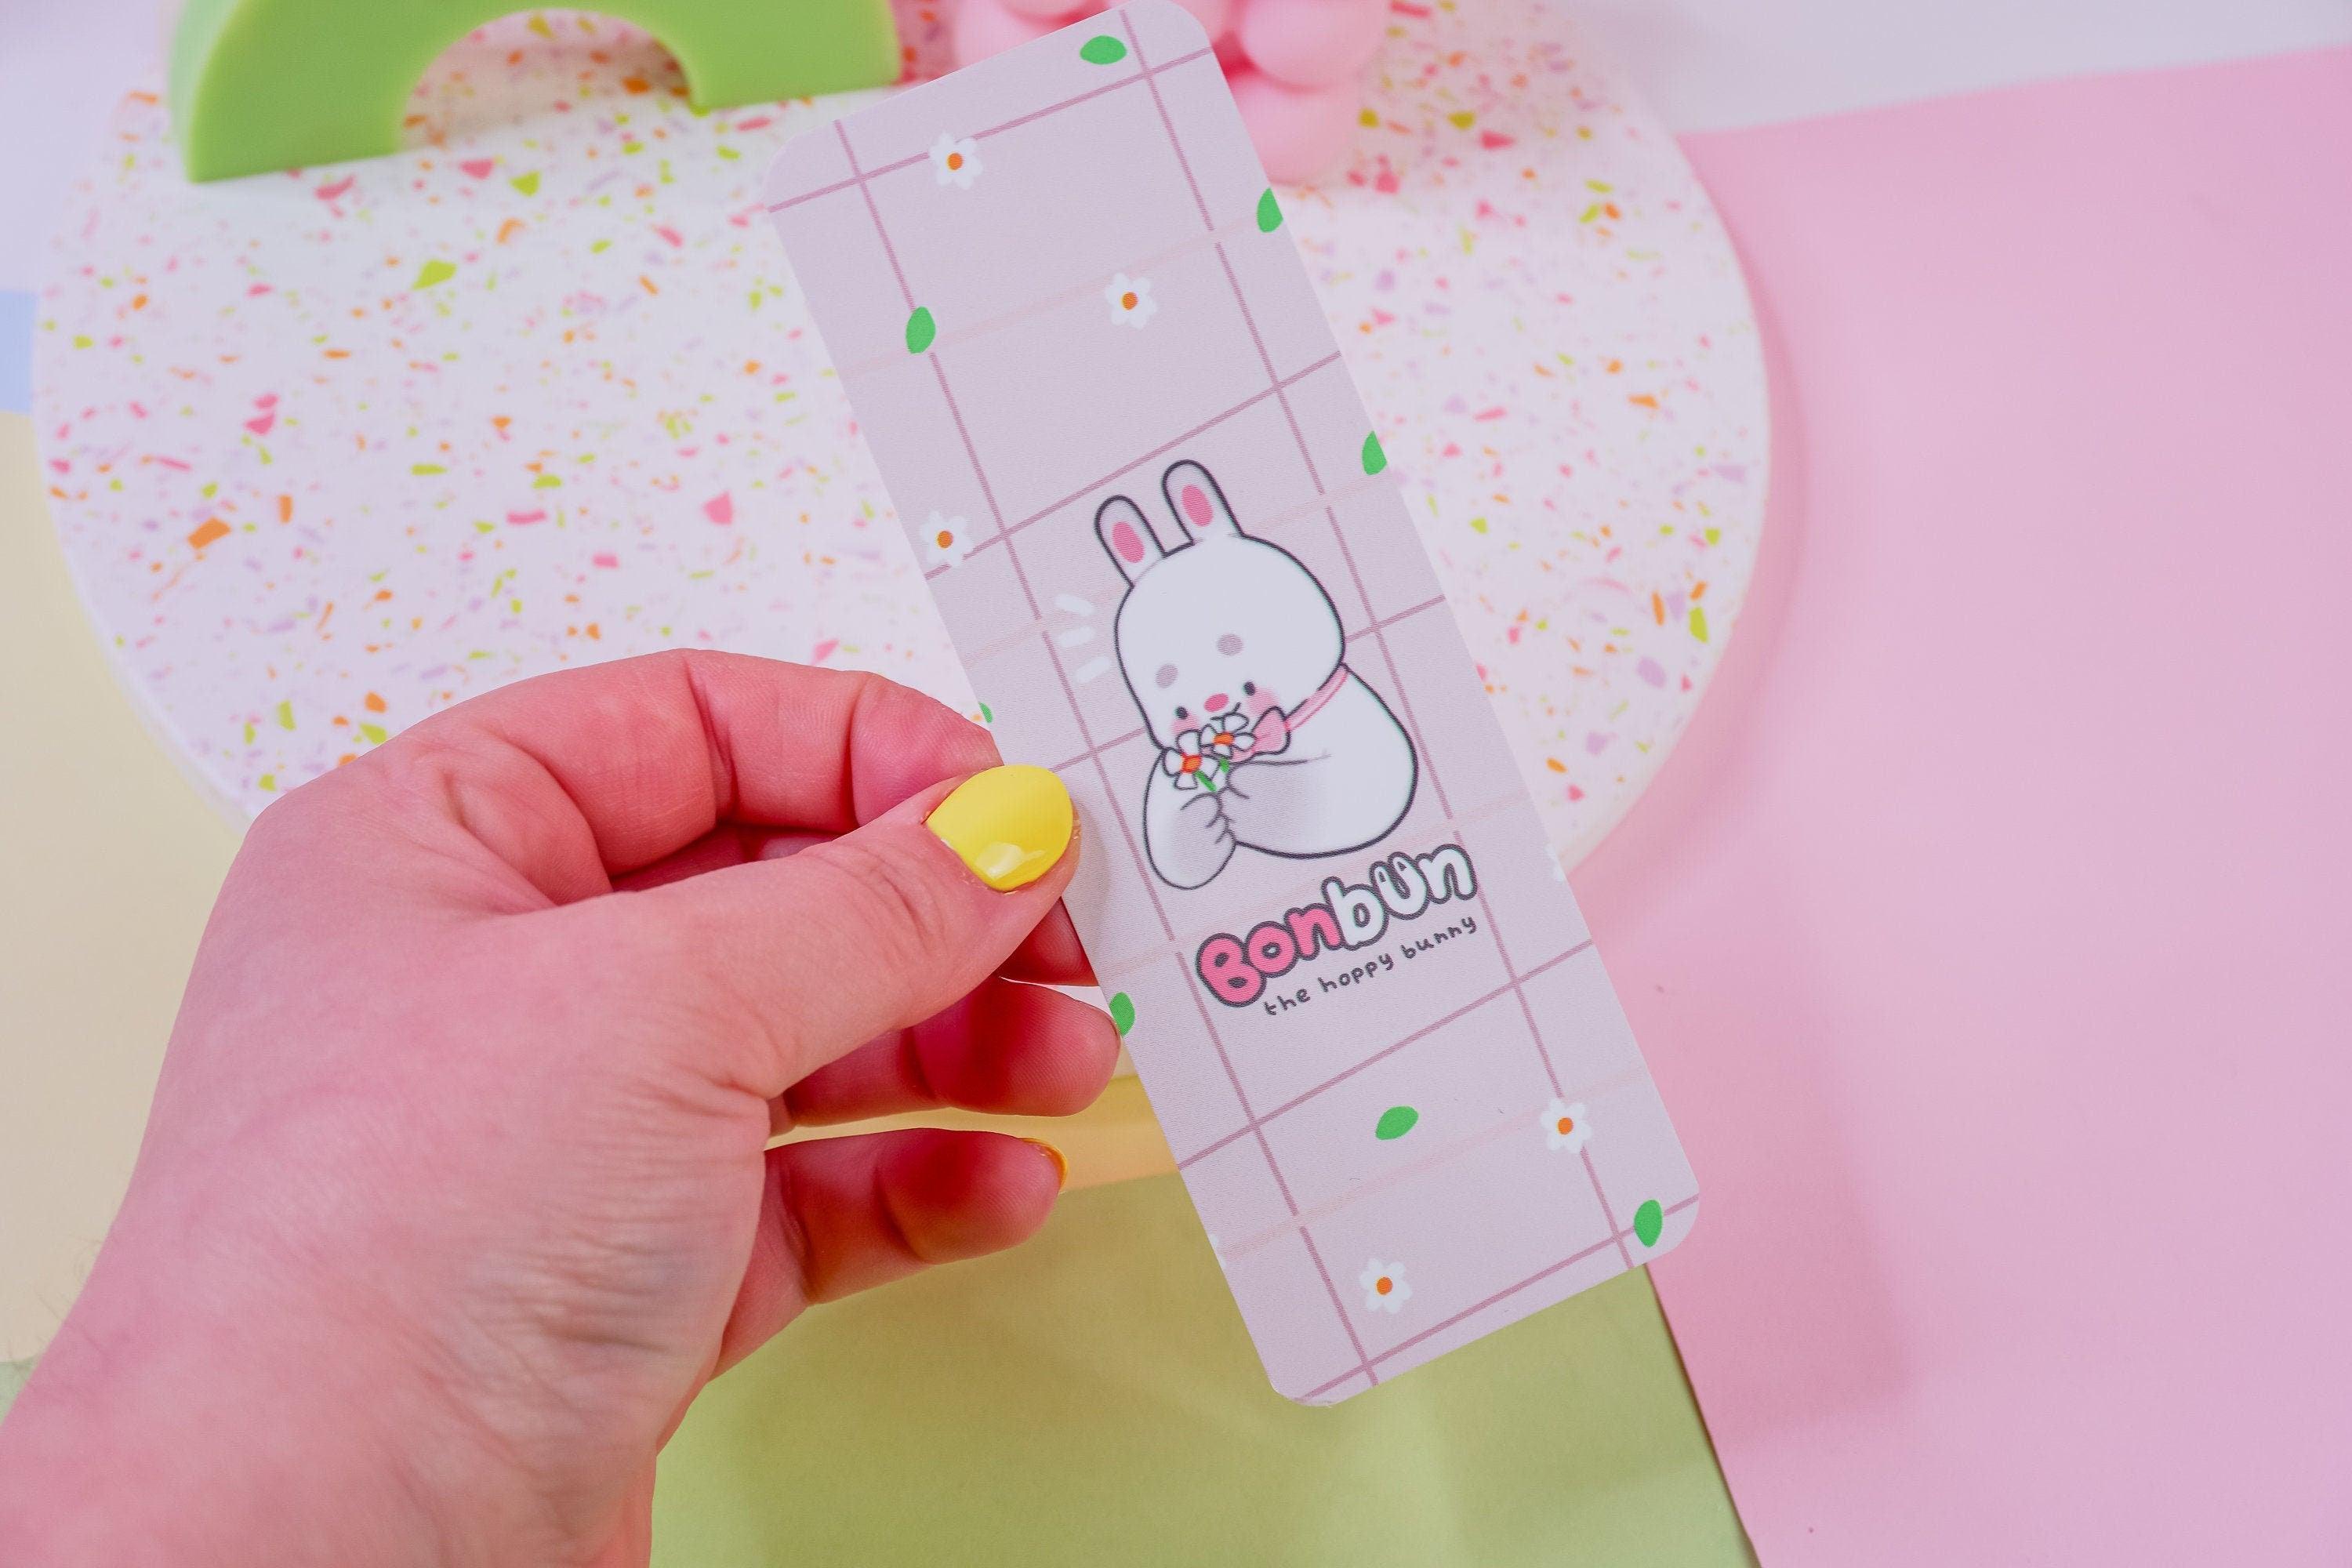 Bonbun the Spring Bunny Bookmark - Featuring Bonbun picking flowers on a charming bookmark printed on quality 400gsm cardstock with smooth velvet lamination.